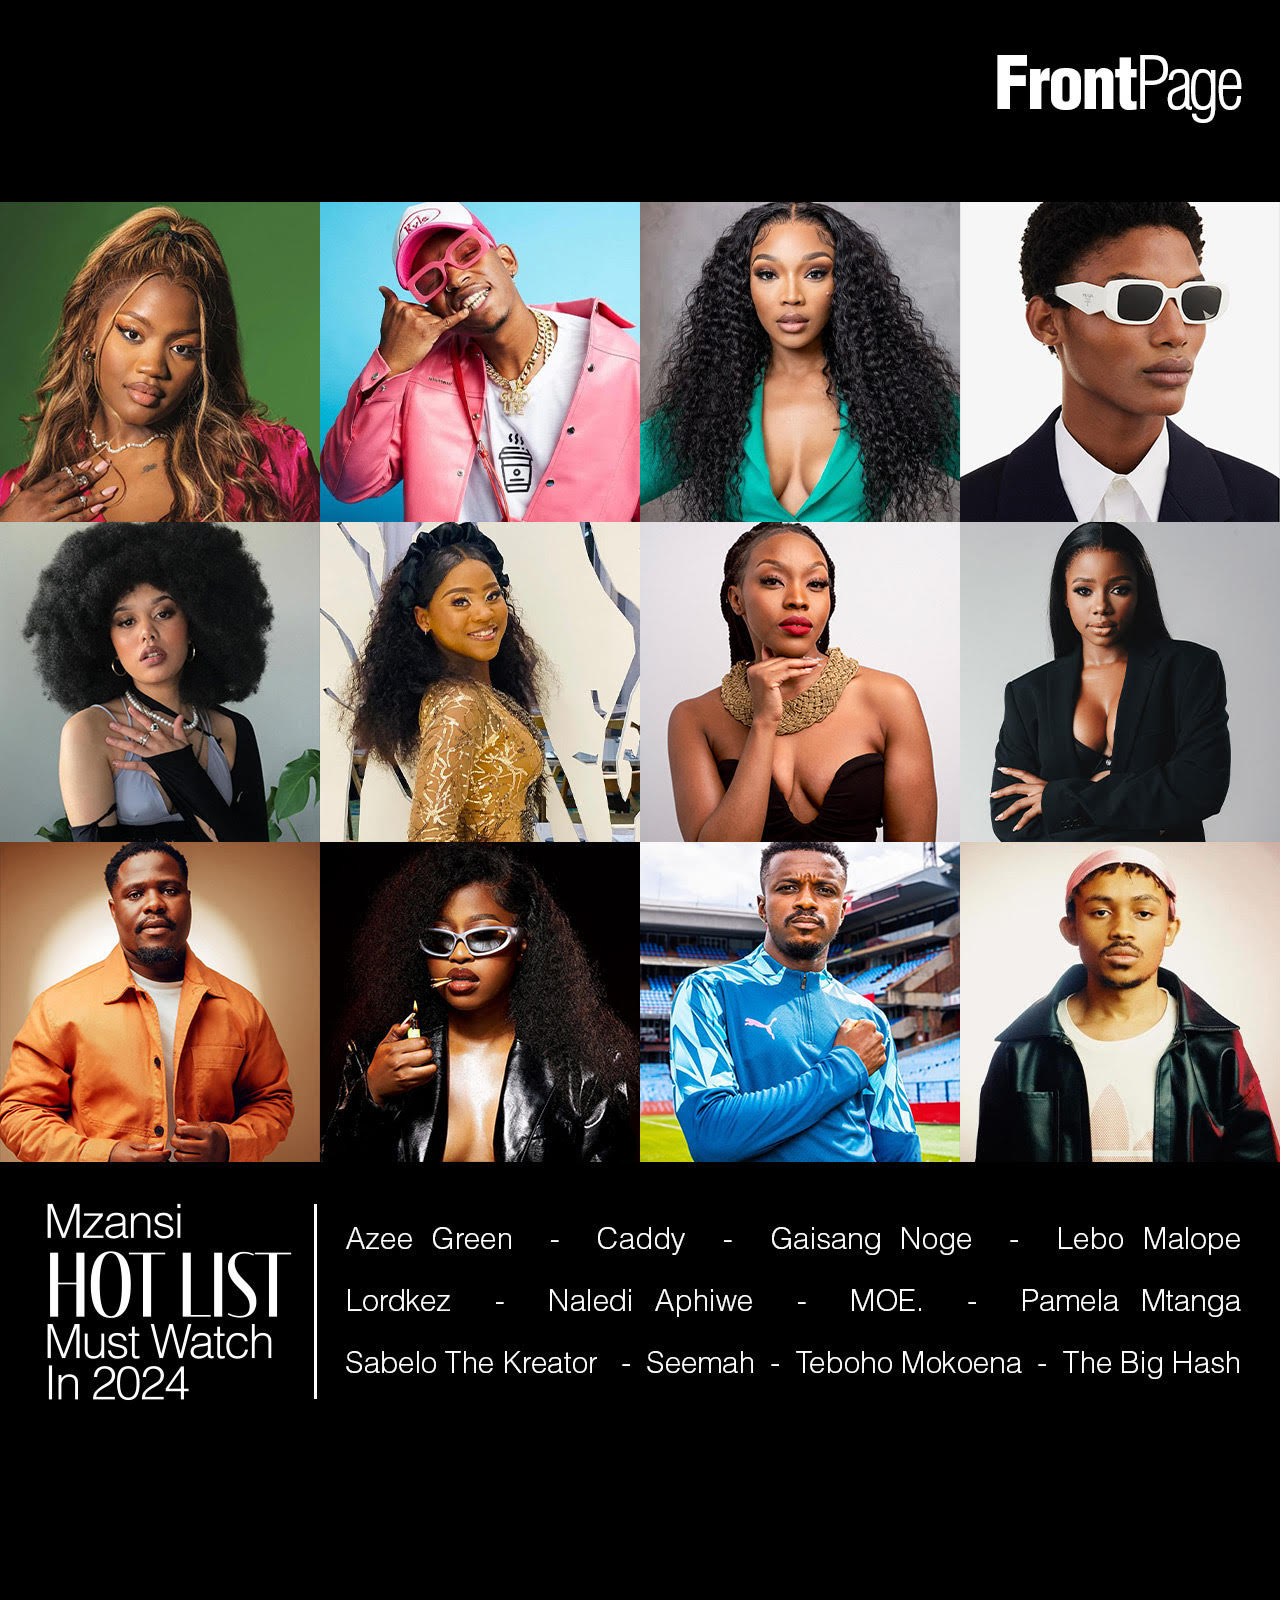 Mzansi Hot List: Must Watch In 2024 - Front Page